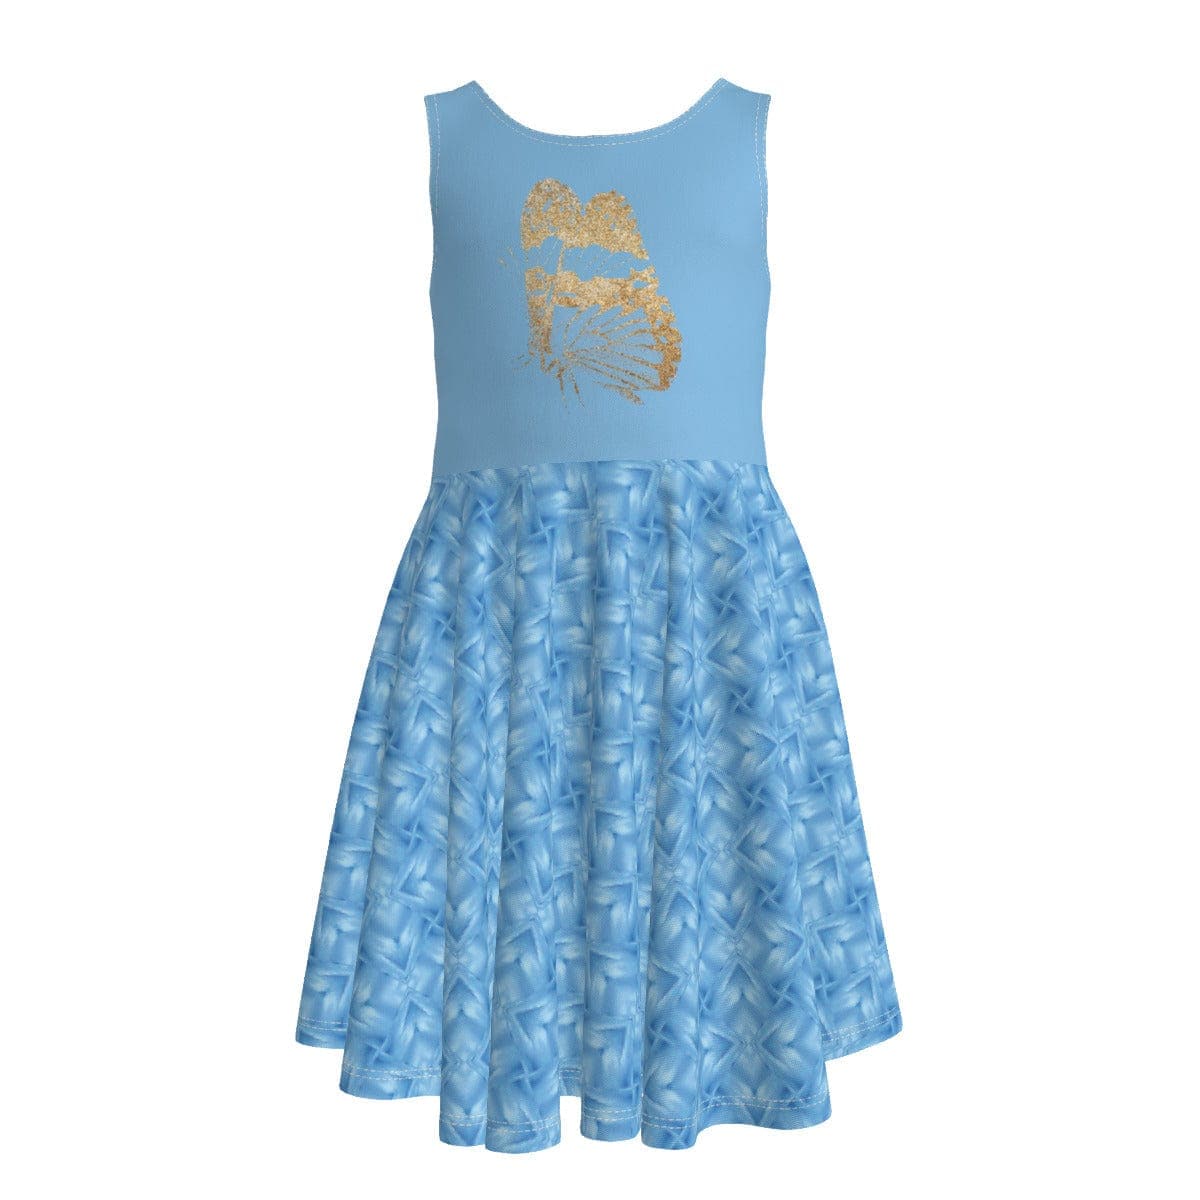 Heavenly blue with Butterfly Kid's Sleeveless Princess Dress